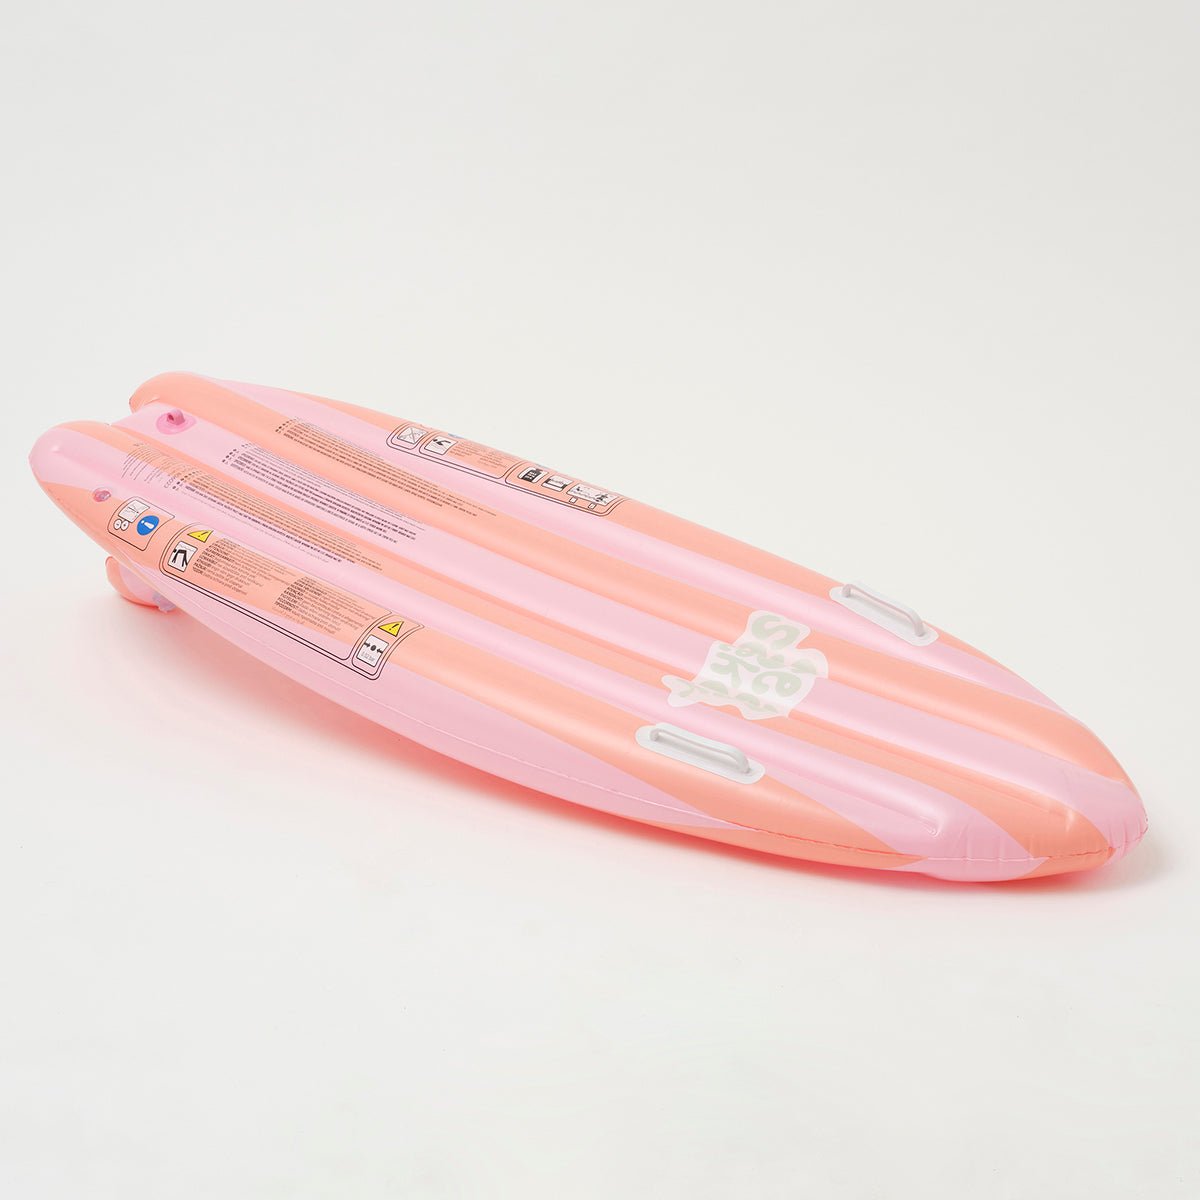 SUNNYLiFE Pink Color Inflatable Ride With Me Surfboard Float Sea Seeker Strawberry - S3LSRFSB